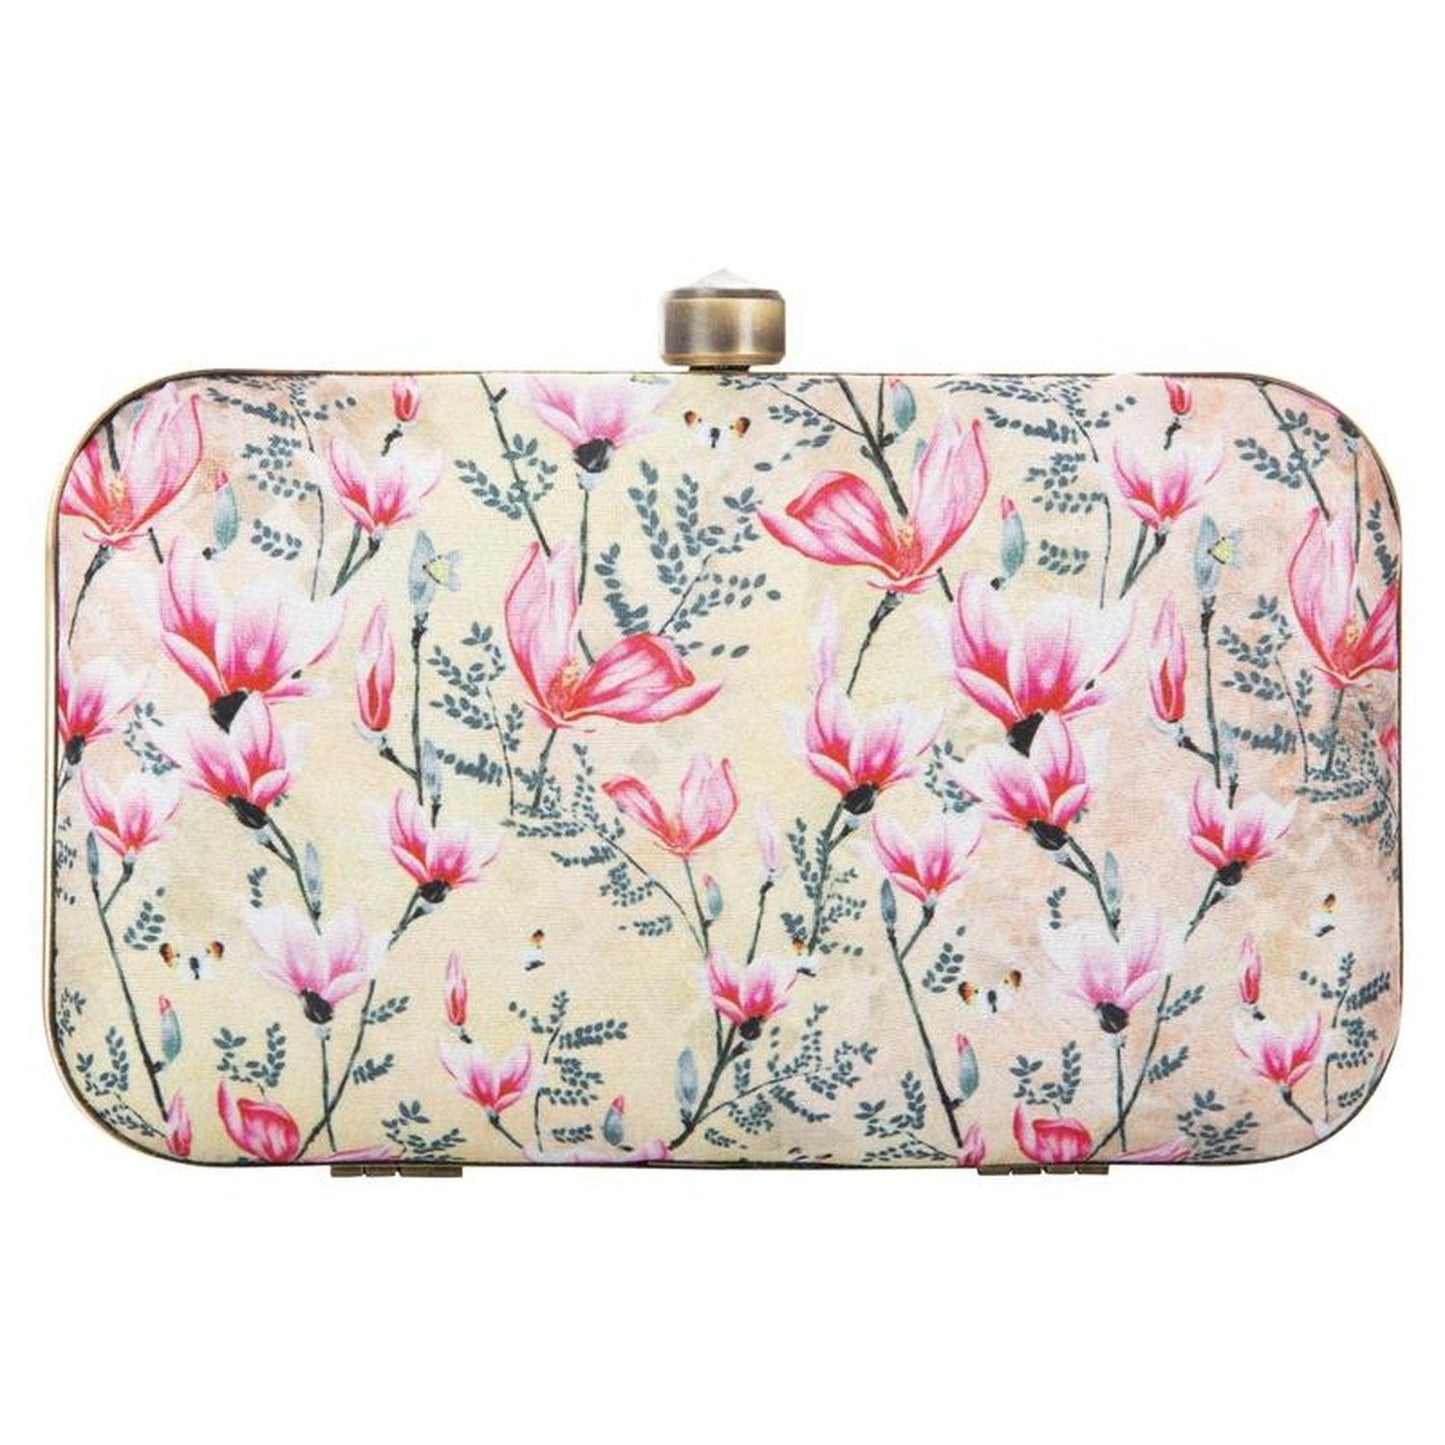 Women's Pink Floral Box Party Clutch Purse with Chain - Stilento